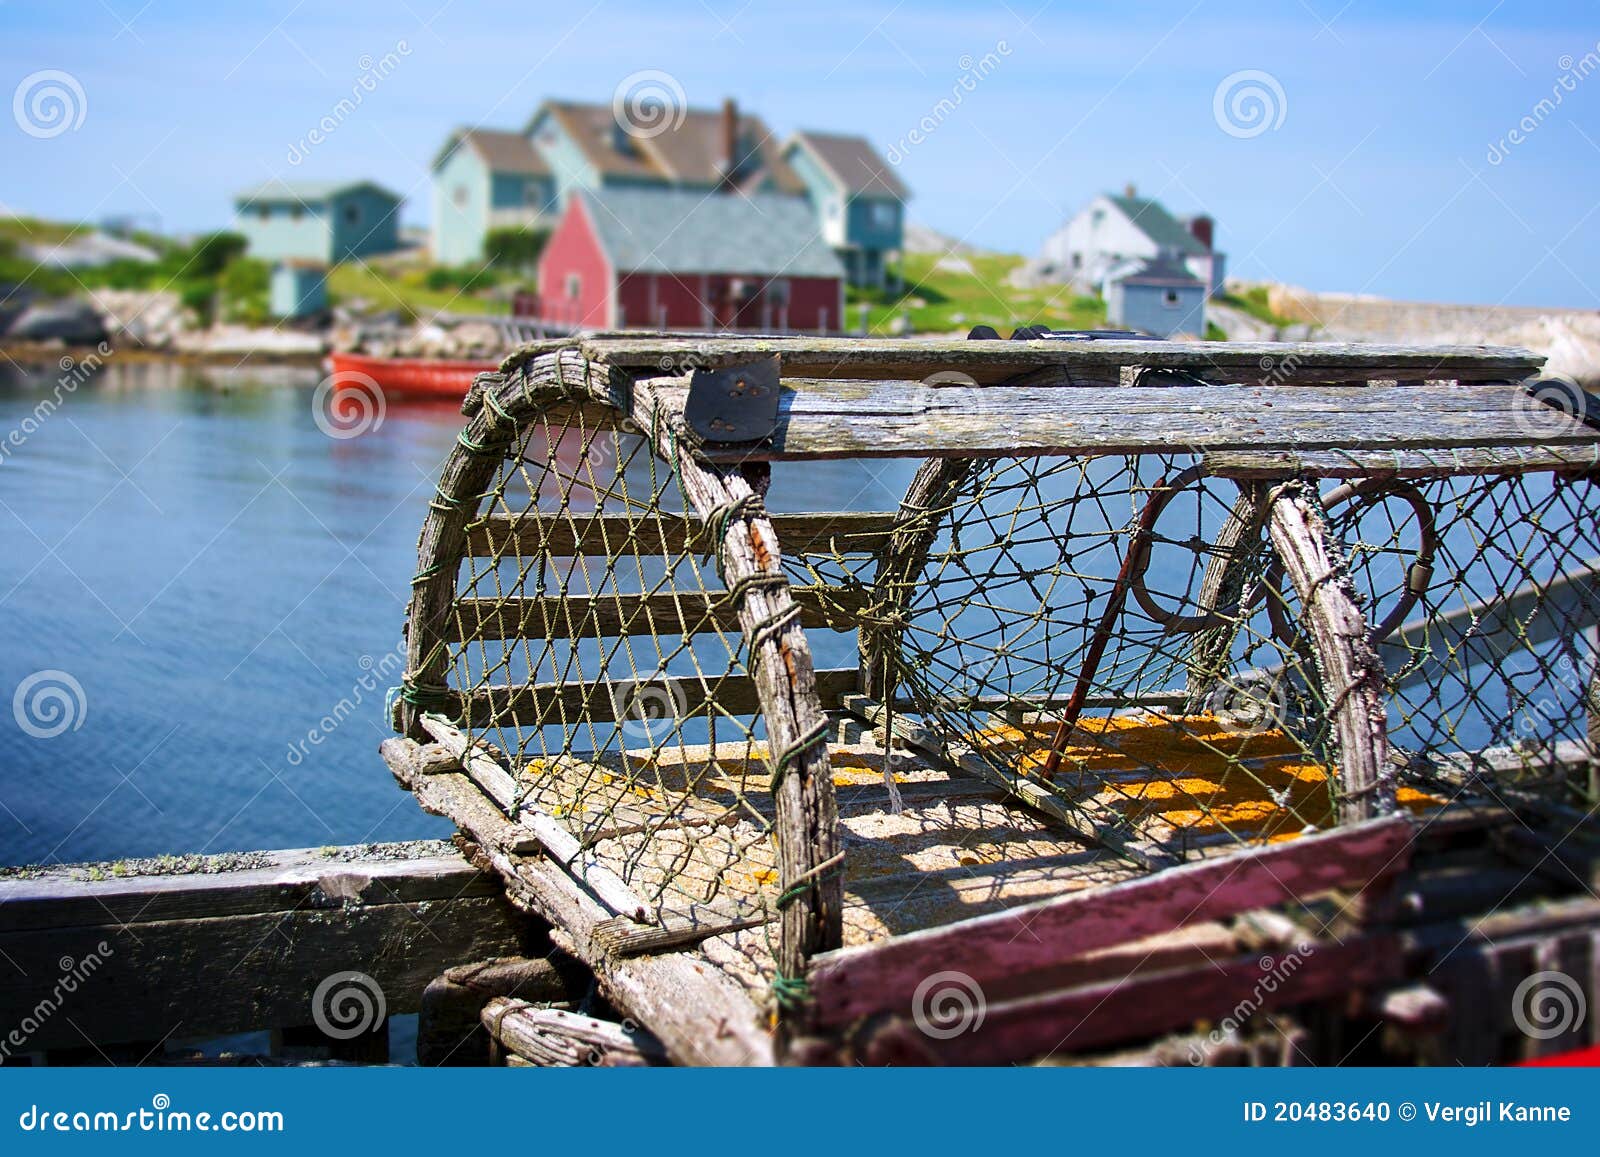 lobster trap and fishing village